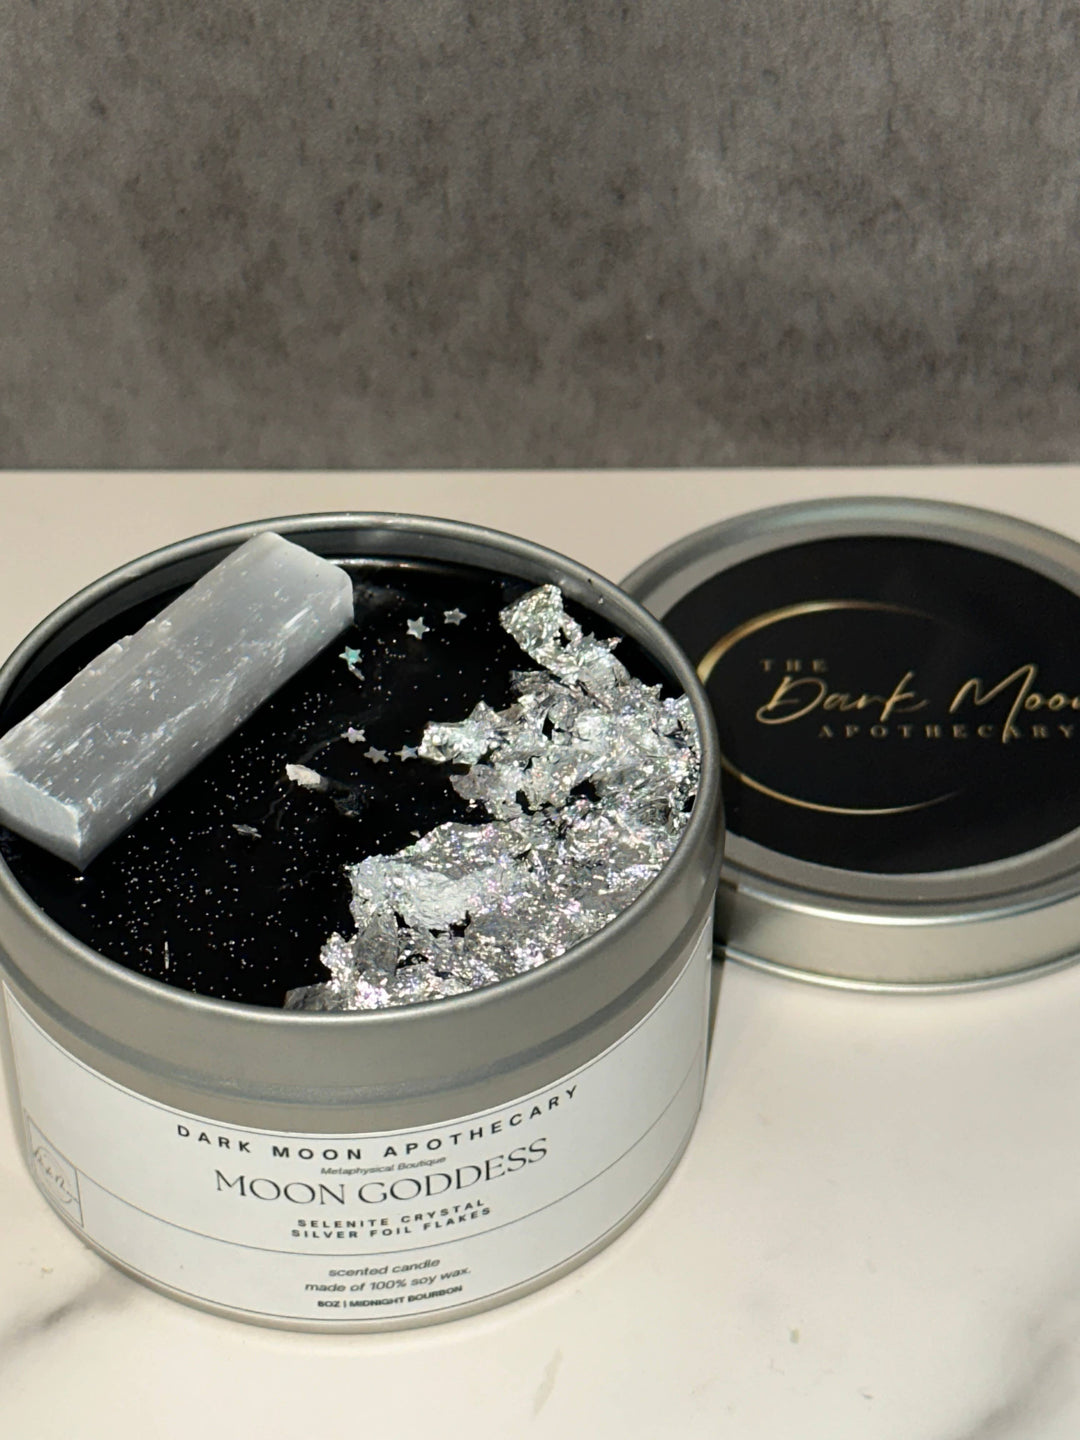 The Dark Moon Apothecary - Moon Goddess Soy Crystal Candle w/ Selenite